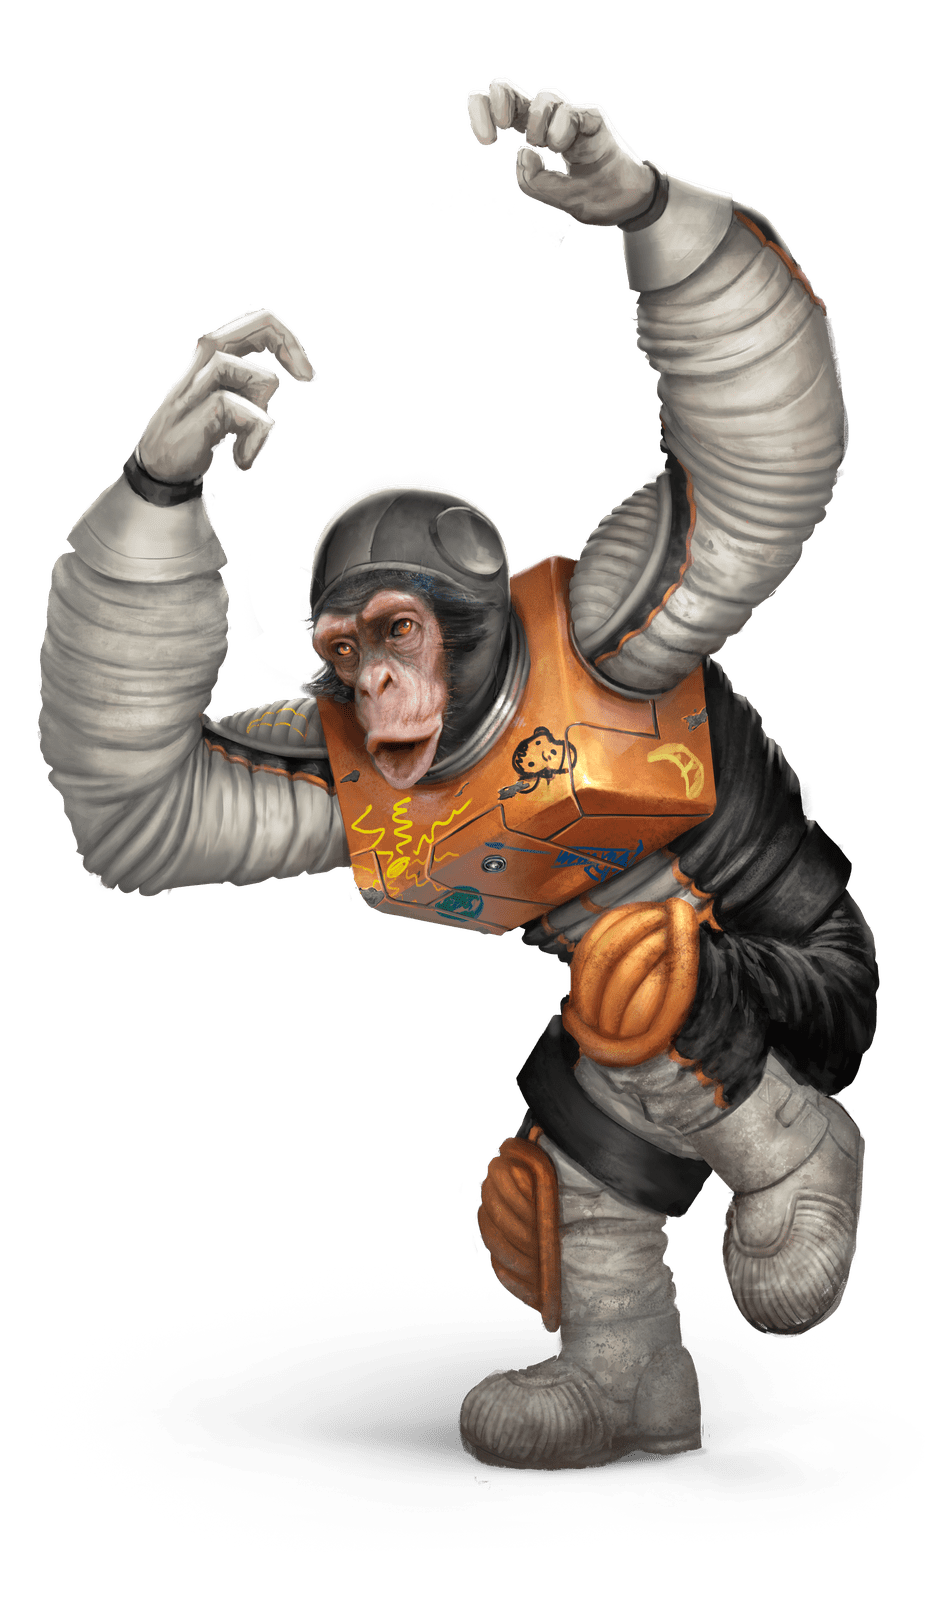 Stationfall board game - space monkey